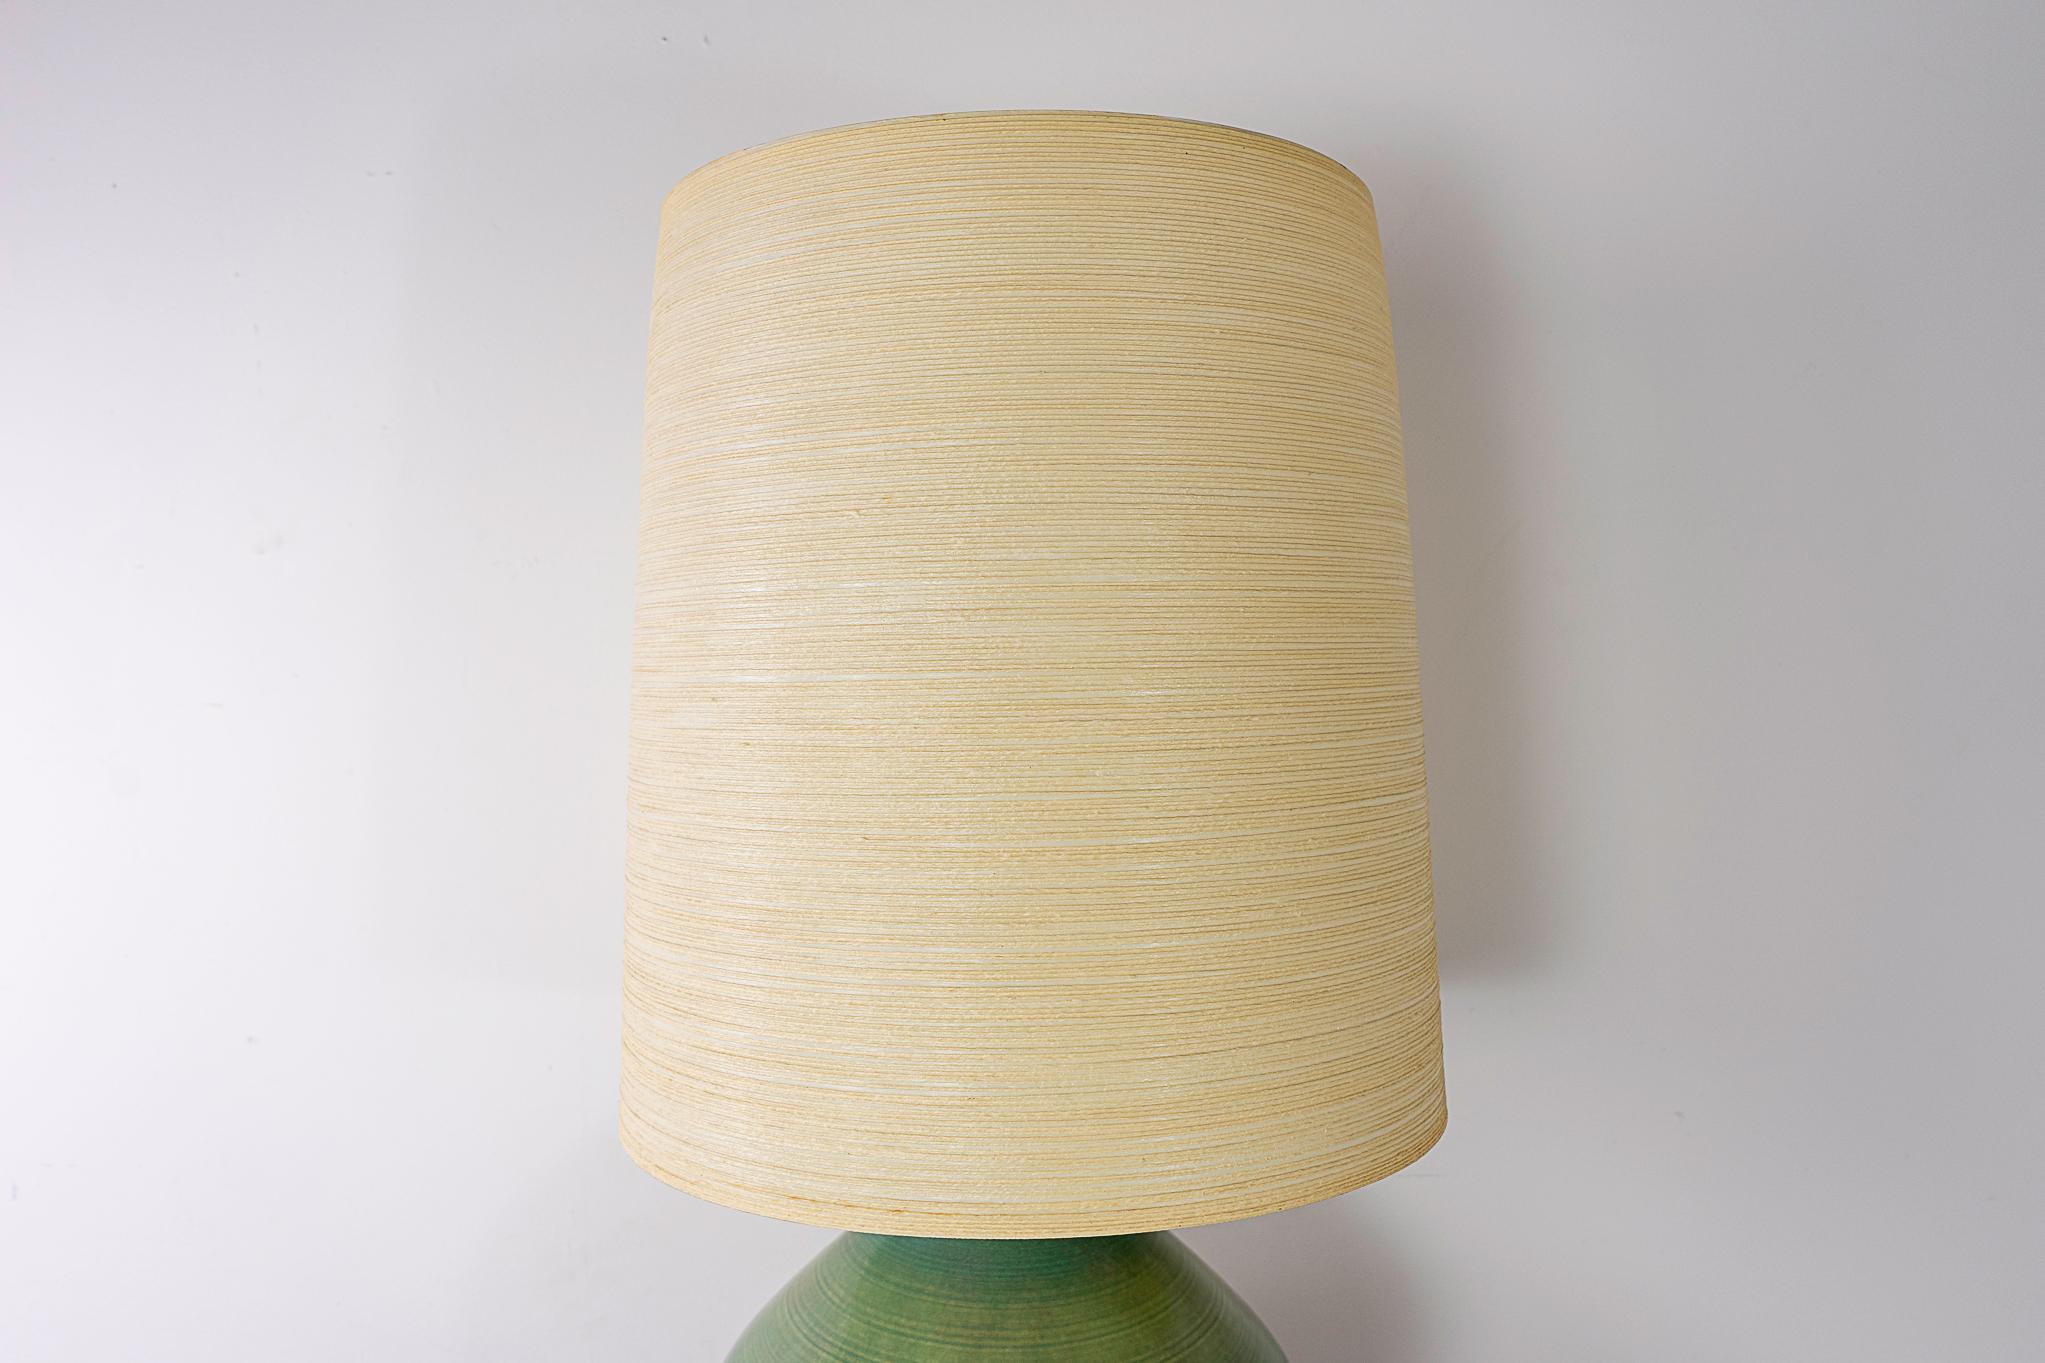 Mid-20th Century Large Ceramic Table Lamp by Lotte & Gunnar Bostlund